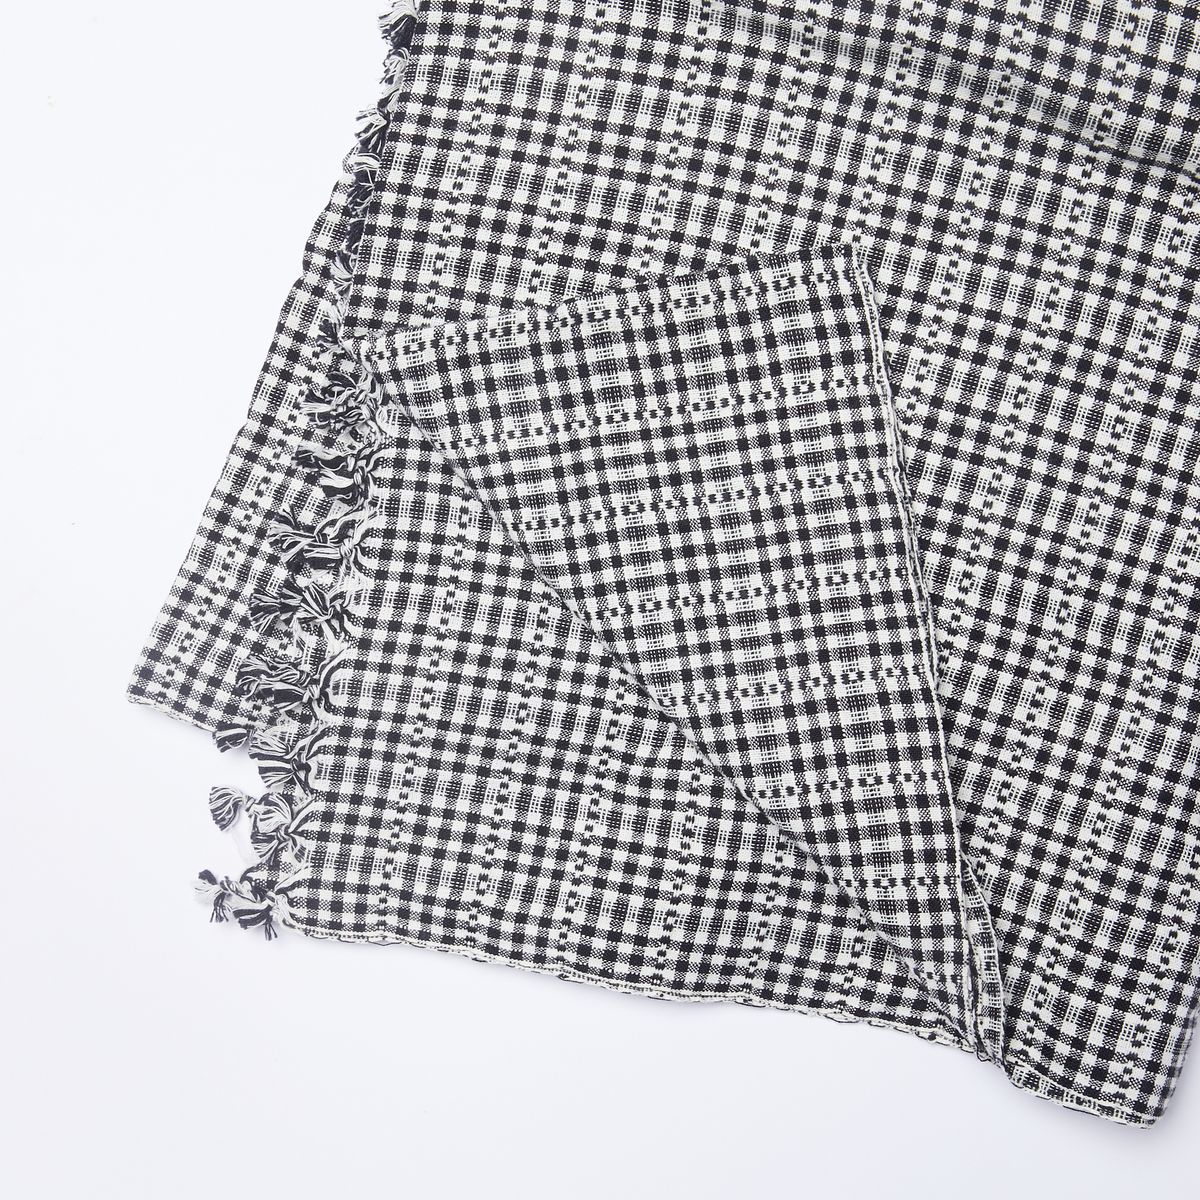 A folded black and white gingham cotton tablecloth with one corner pulled back